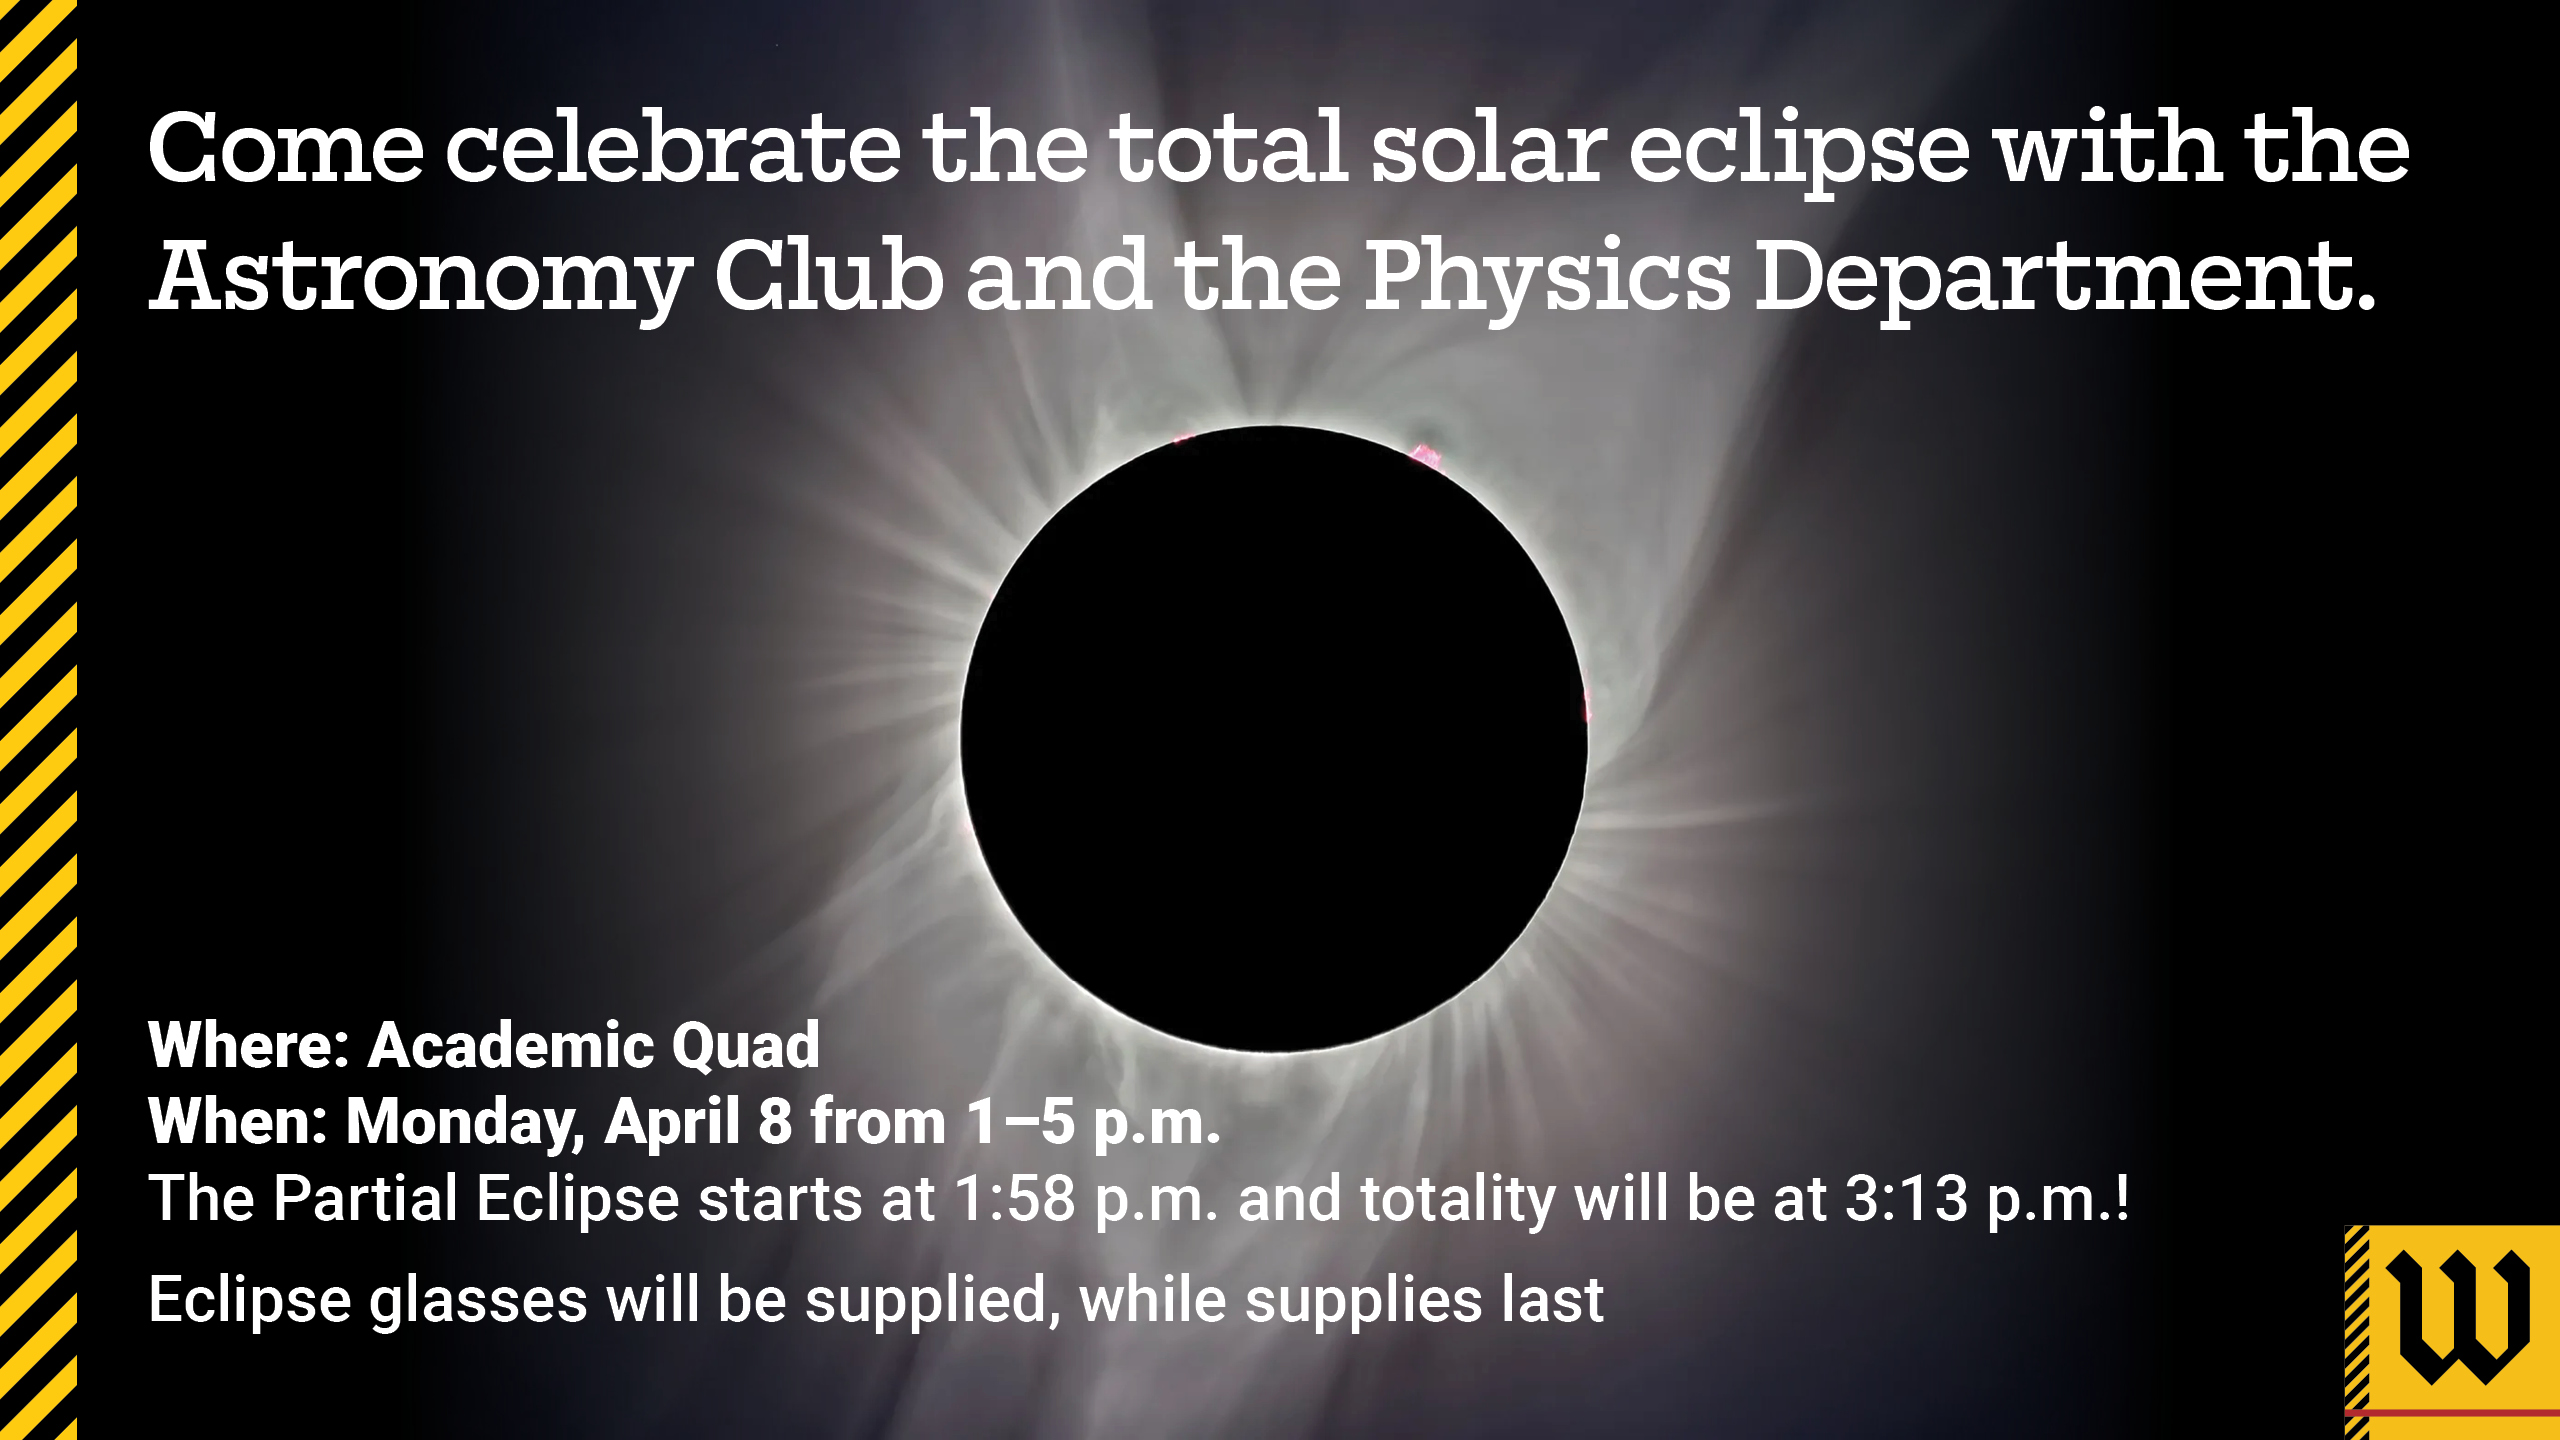 Flyer for eclipse event. Text says Celebrate the total solar eclipse with the Astronomy Club and the Physics Department. Where: Academic Quad When: Monday, April 8 from 1 - 5 pm The partial eclipse starts at 1:58 pm and totality will be at 3:13 pm! Eclipse glasses will be supplied, while supplies last.